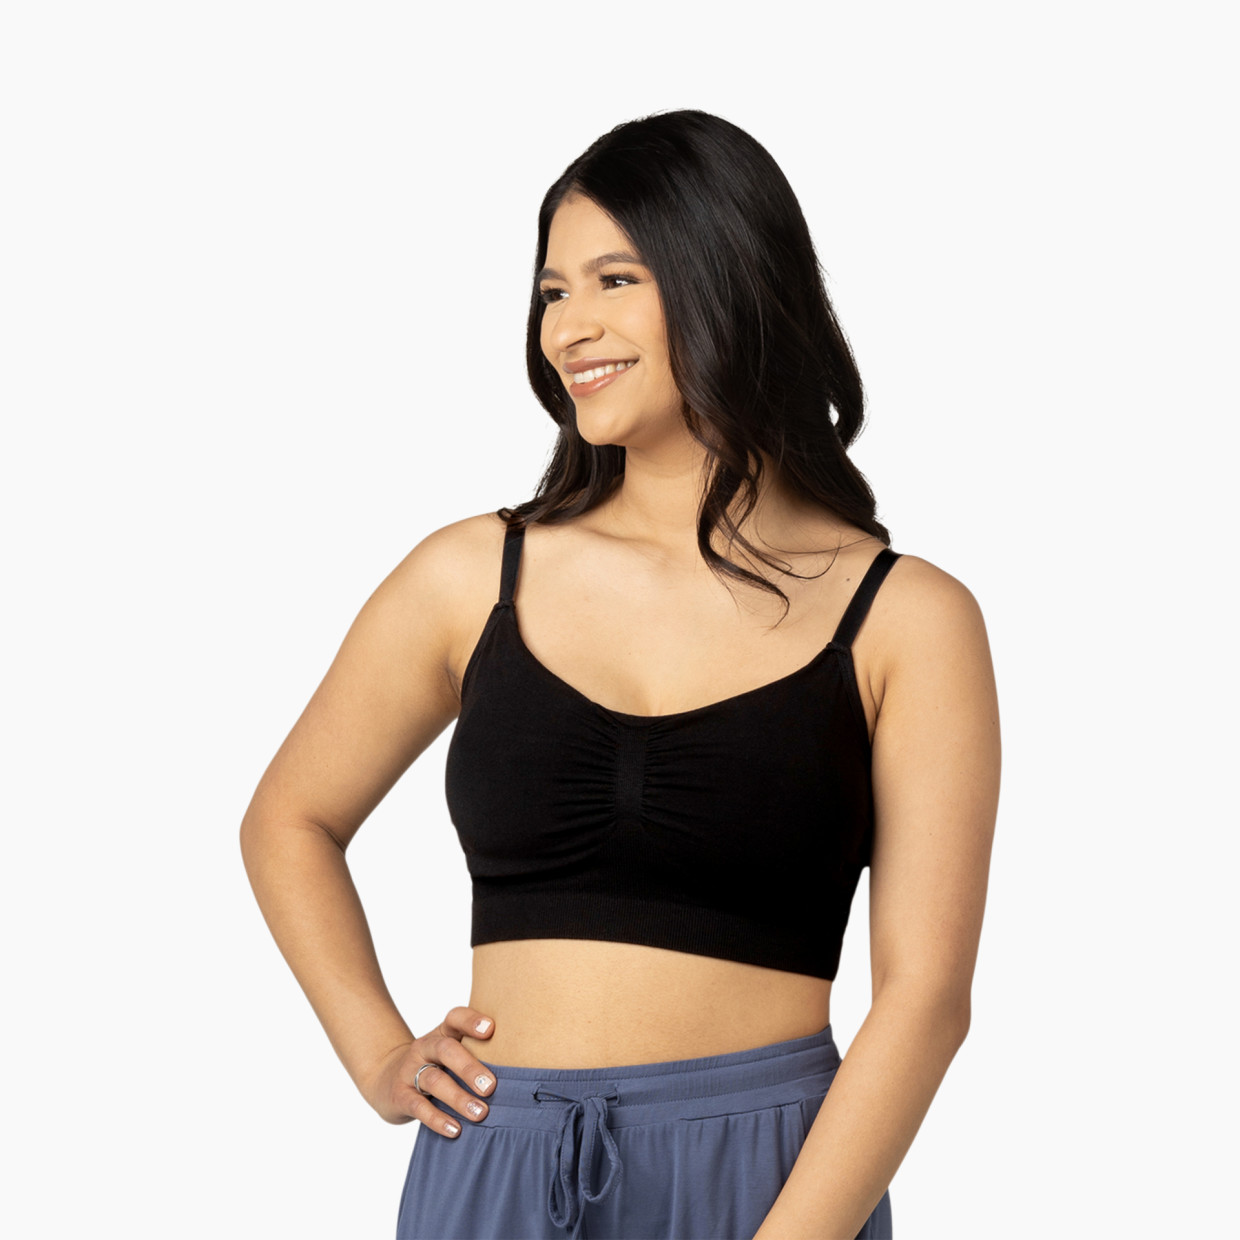 Kindred Bravely Sublime Bamboo Hands-Free Pumping Lounge & Sleep Bra - Black, X-Large.